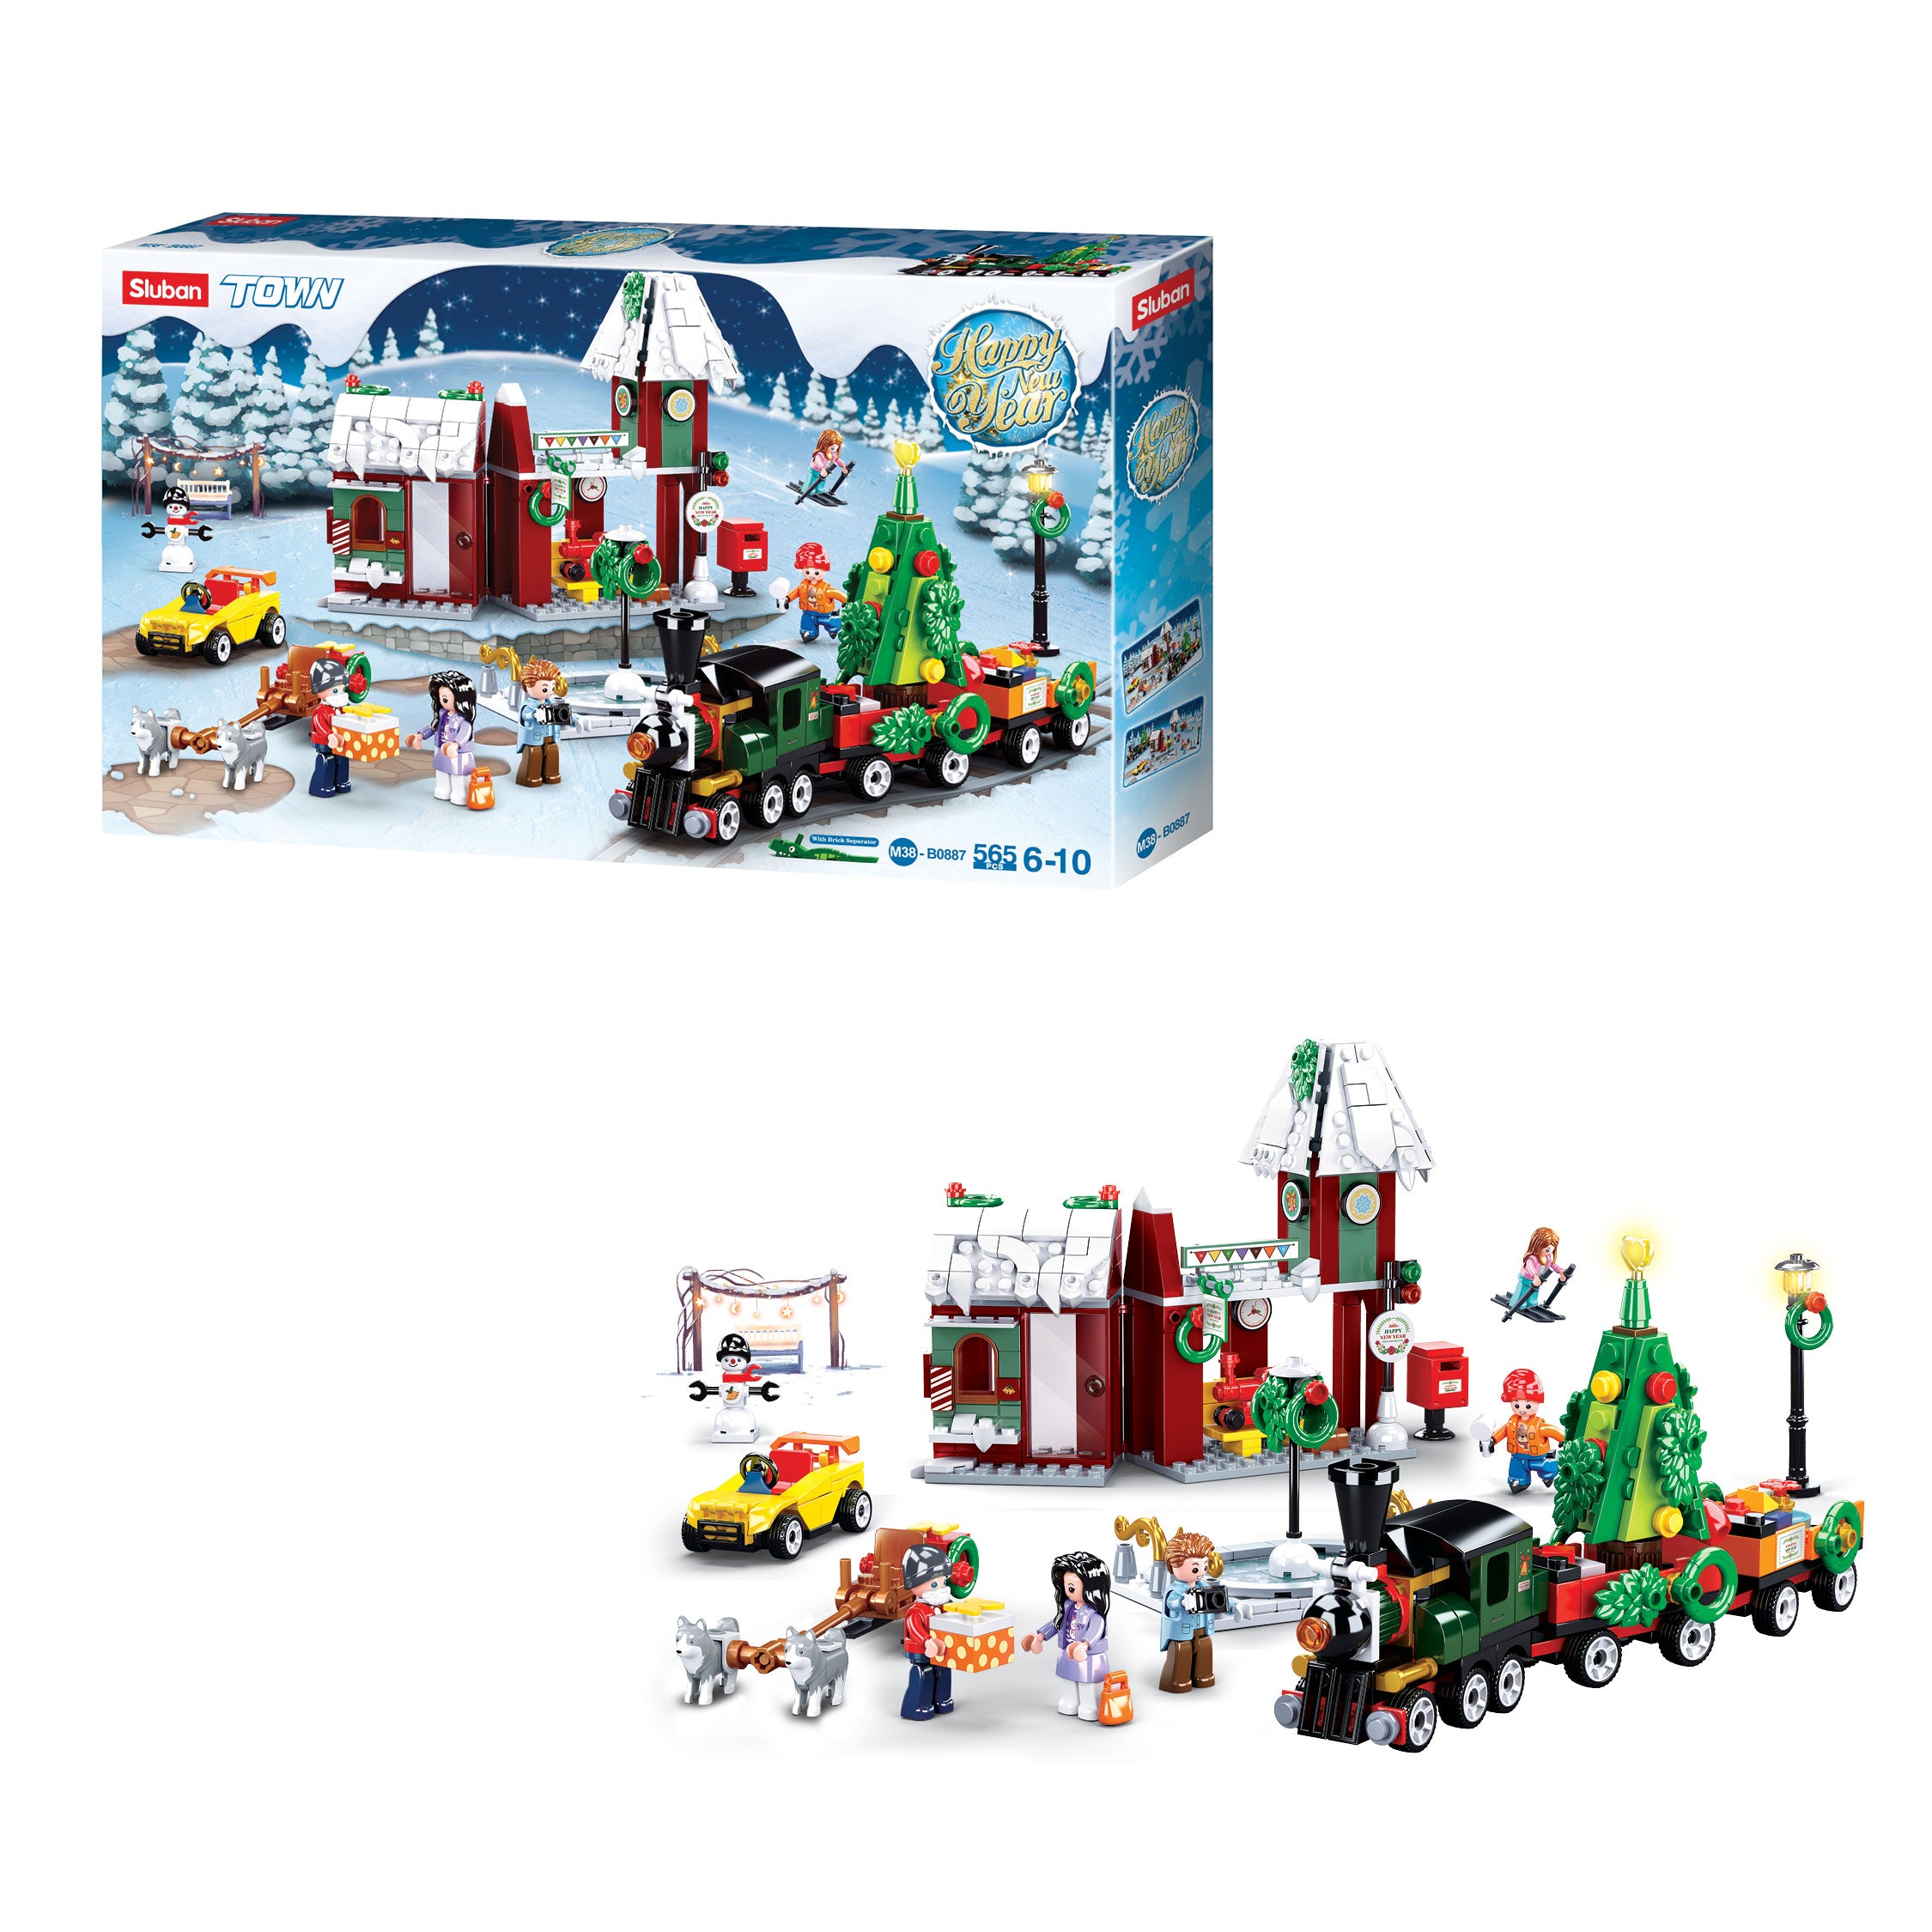 Sluban® New Year (M38-B0887) (565 Pieces) Building Blocks Kit For Boys Aged 6 Years And Above Creative Construction Set Educational Stem Toy, Ideal For Gifting Birthday Gift Return Gift, Blocks Compatible With Other Leading Brands, Bis Certified.